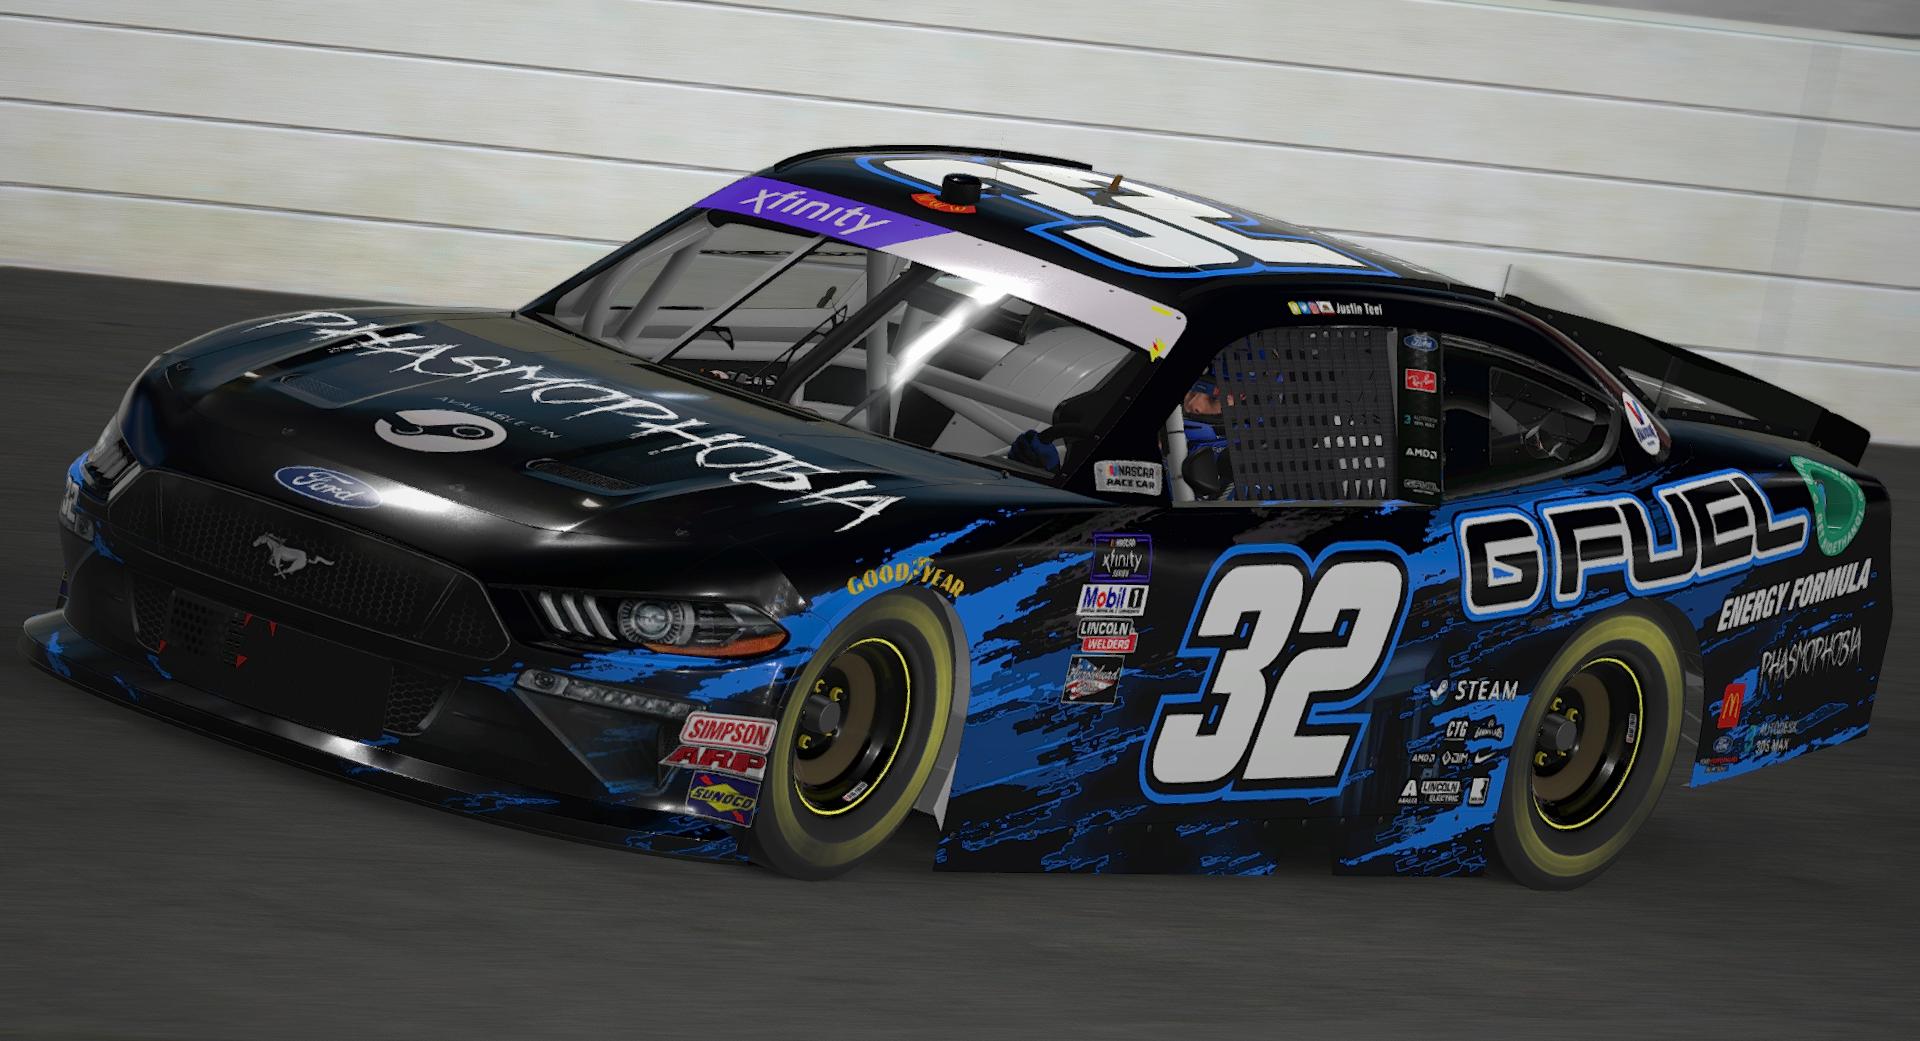 Preview of Phasmophobia Xfinity Ford Mustang by Justin Teel